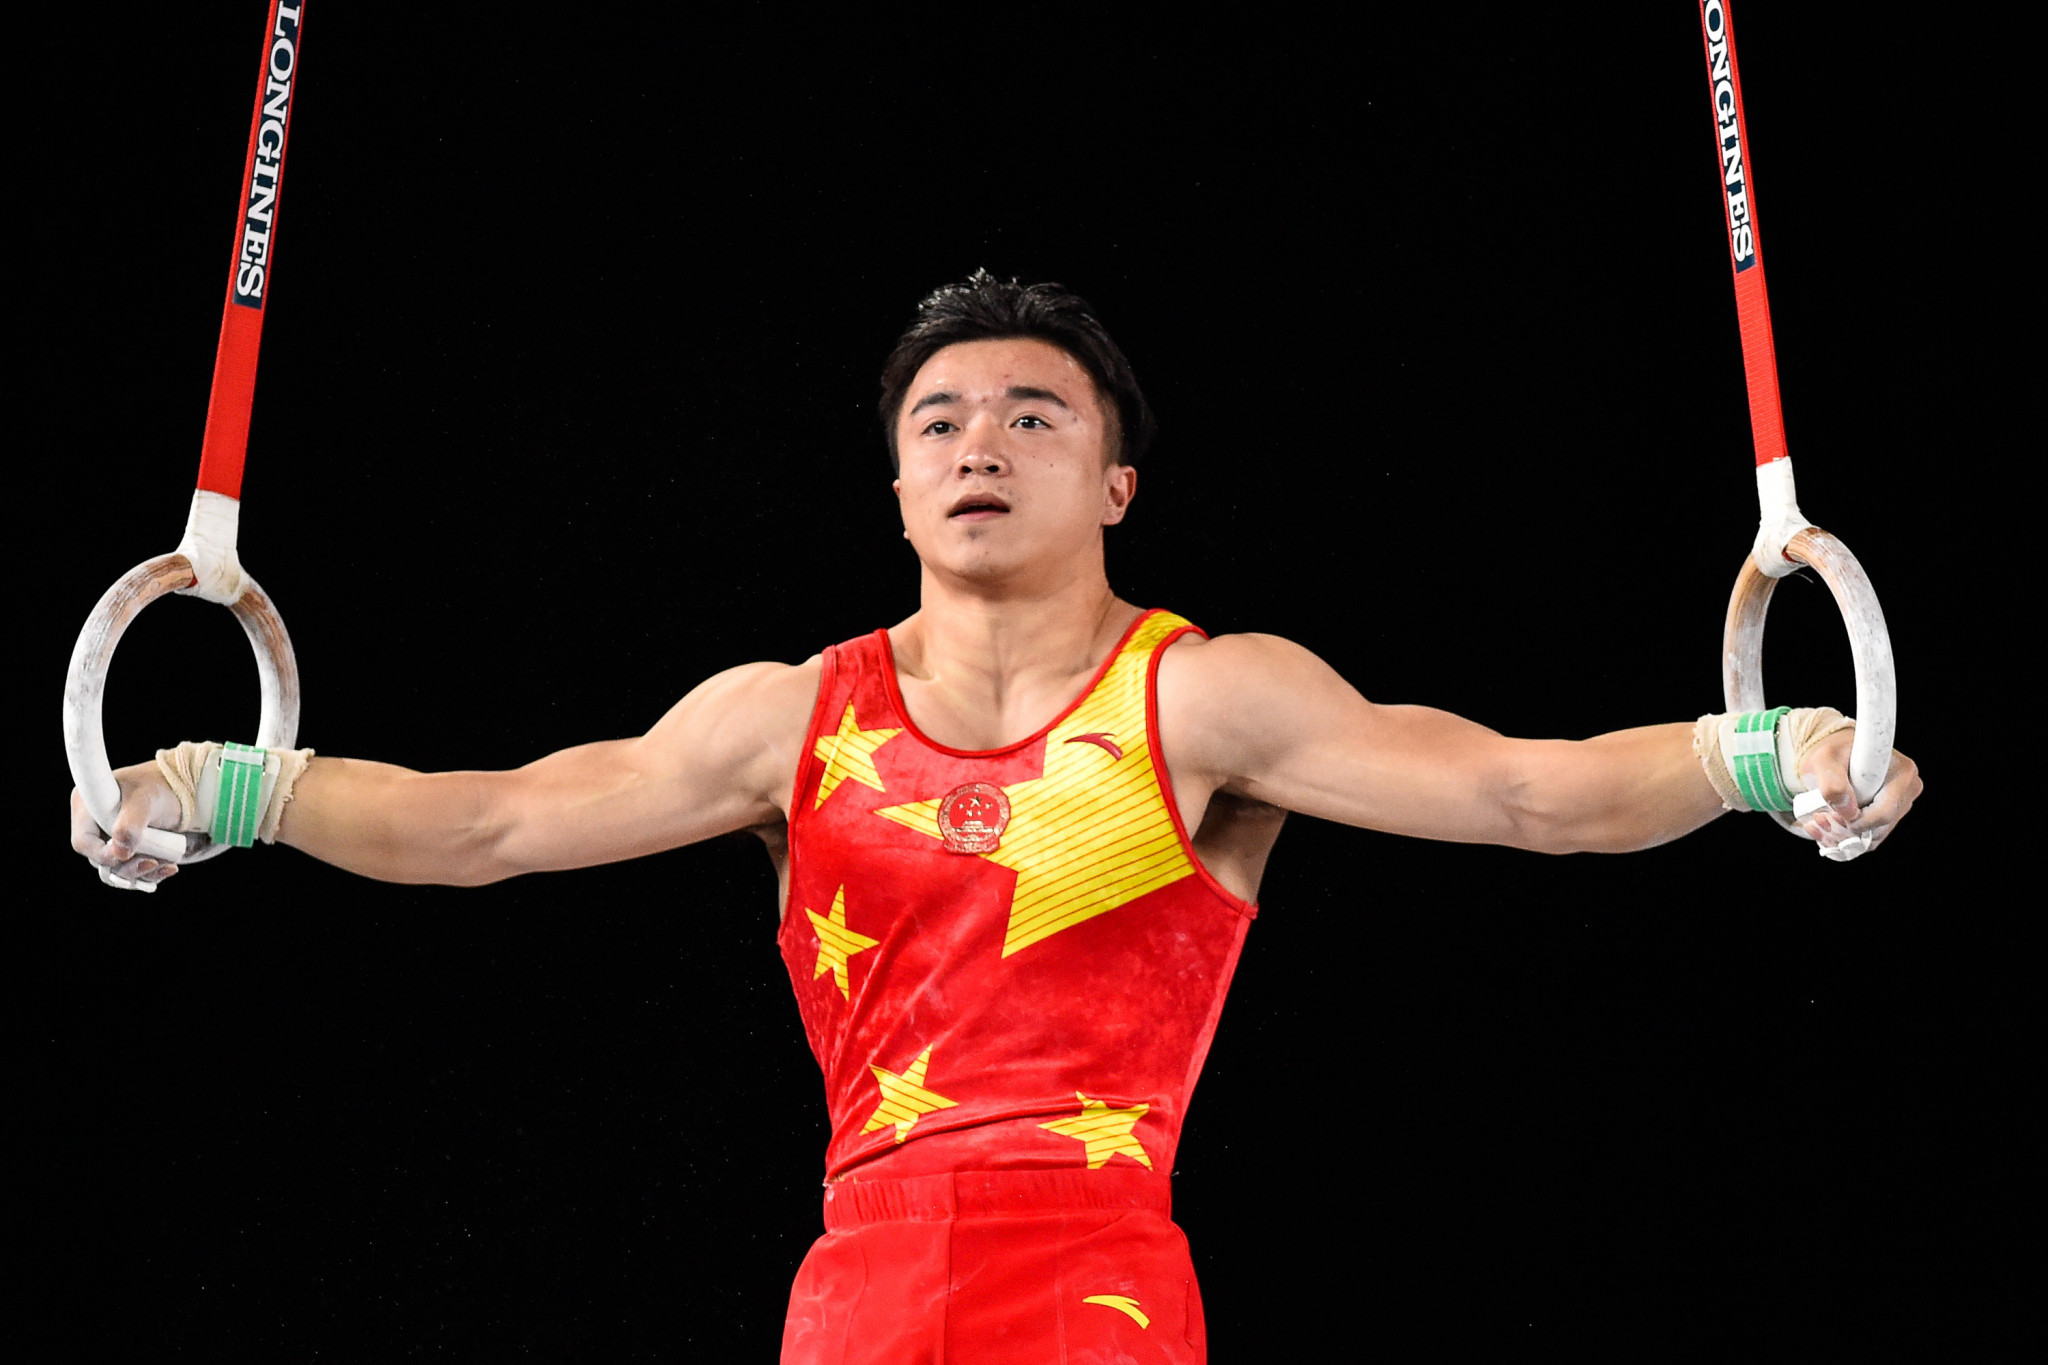 Yang Liu took gold in the rings event on a fruitful day for China ©Getty Images